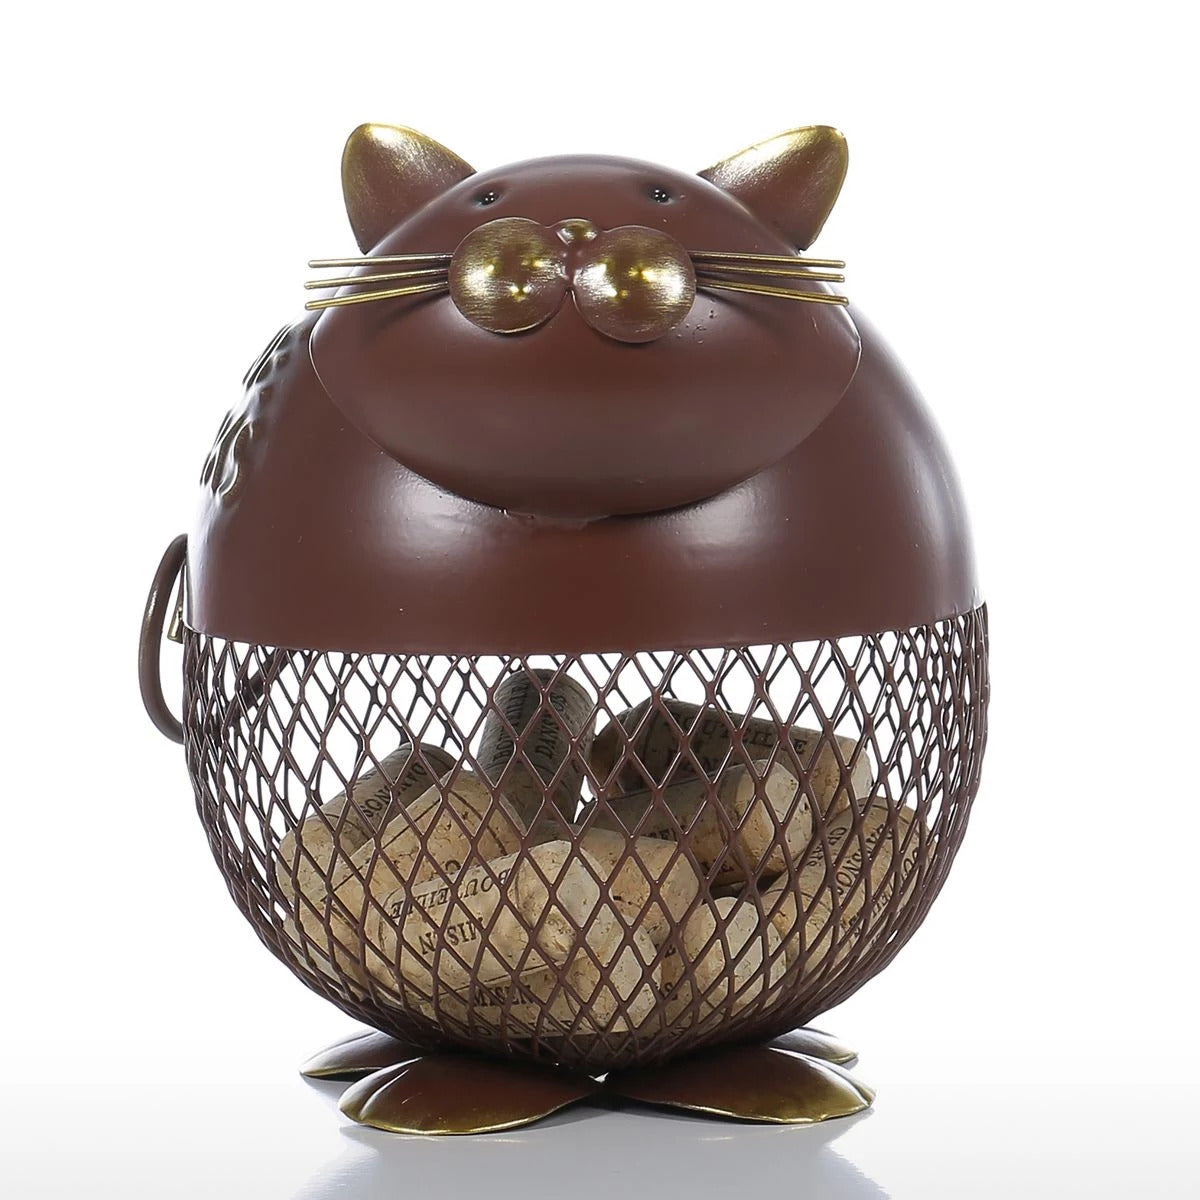 Decorative Jar with Funny Cat Ornament for Kitchen Countertop Decor